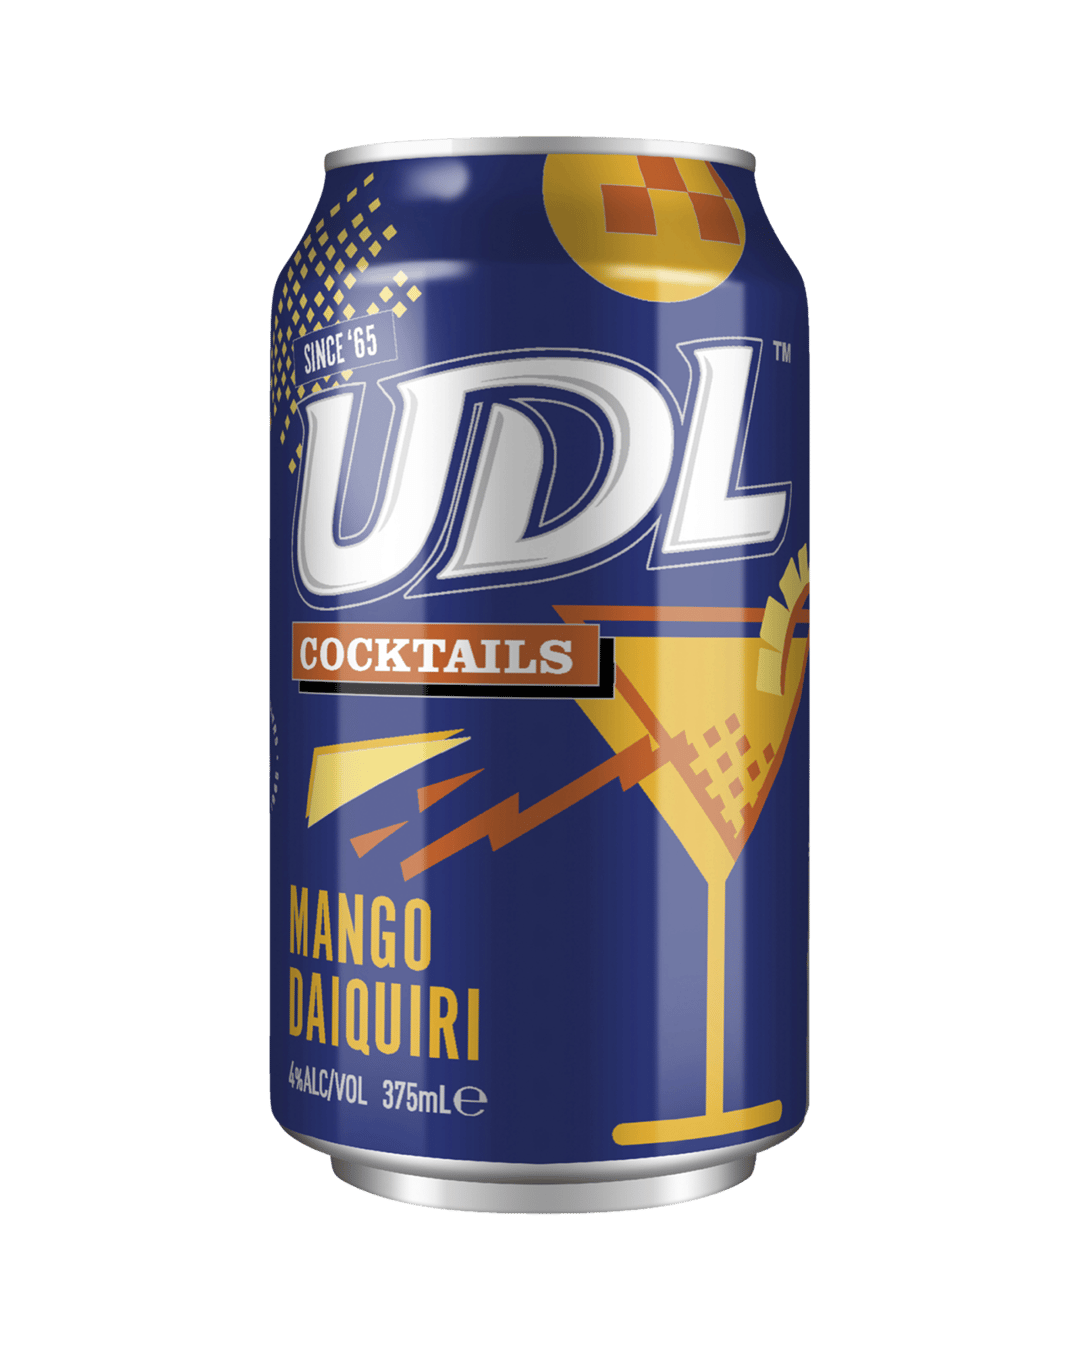 Buy Udl Cocktails Pina Colada Can 375ml online with (same-day FREE ...